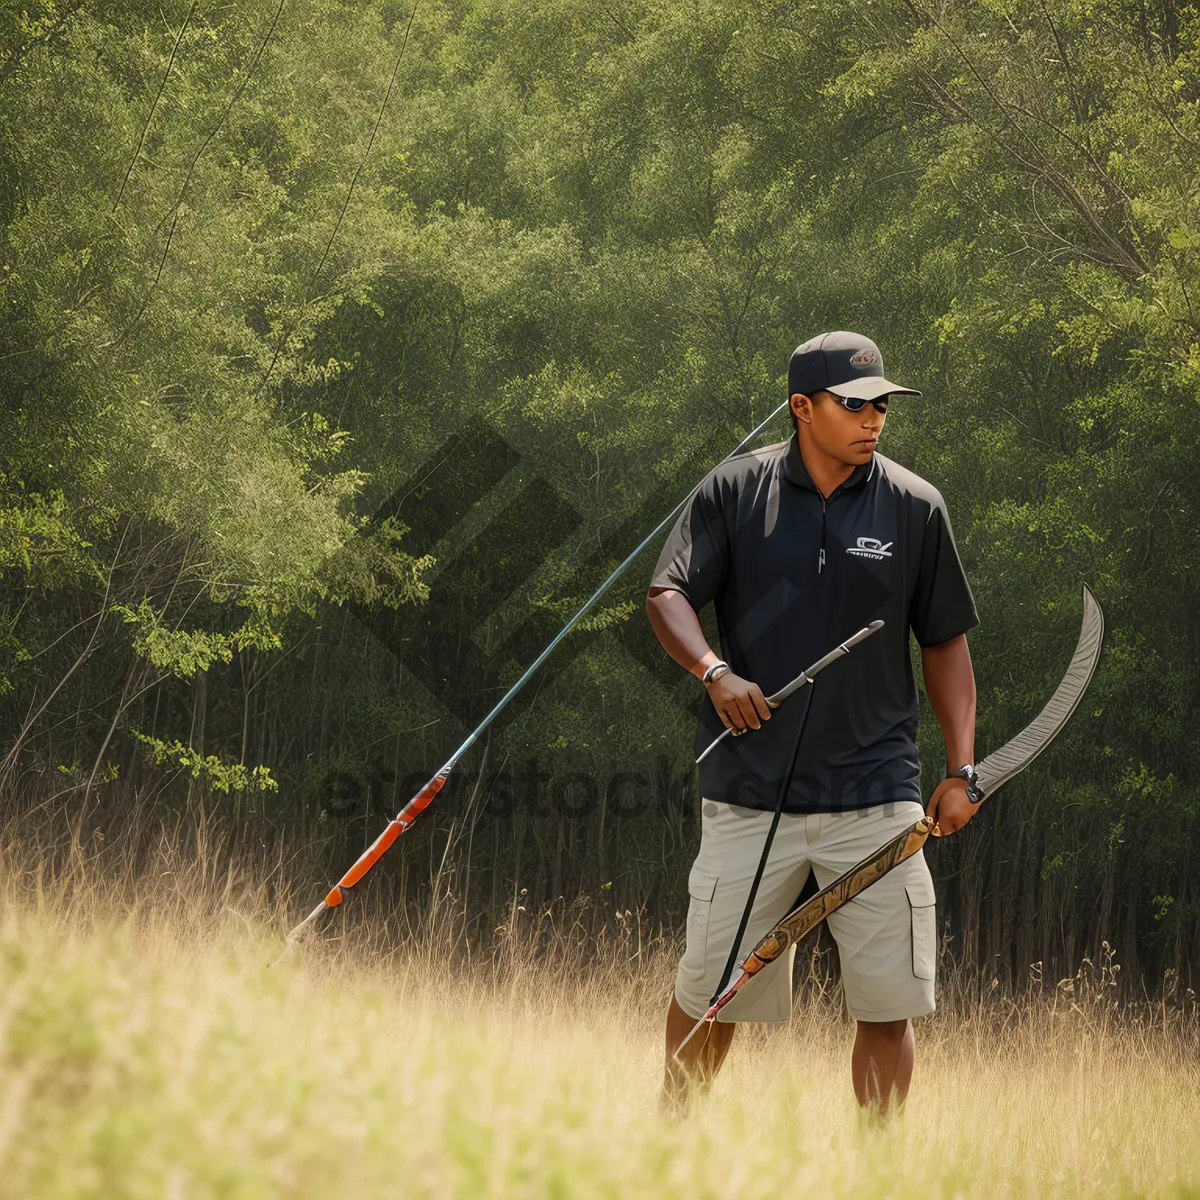 Picture of Active Farmer Sporting a Bow and Arrow Outdoors